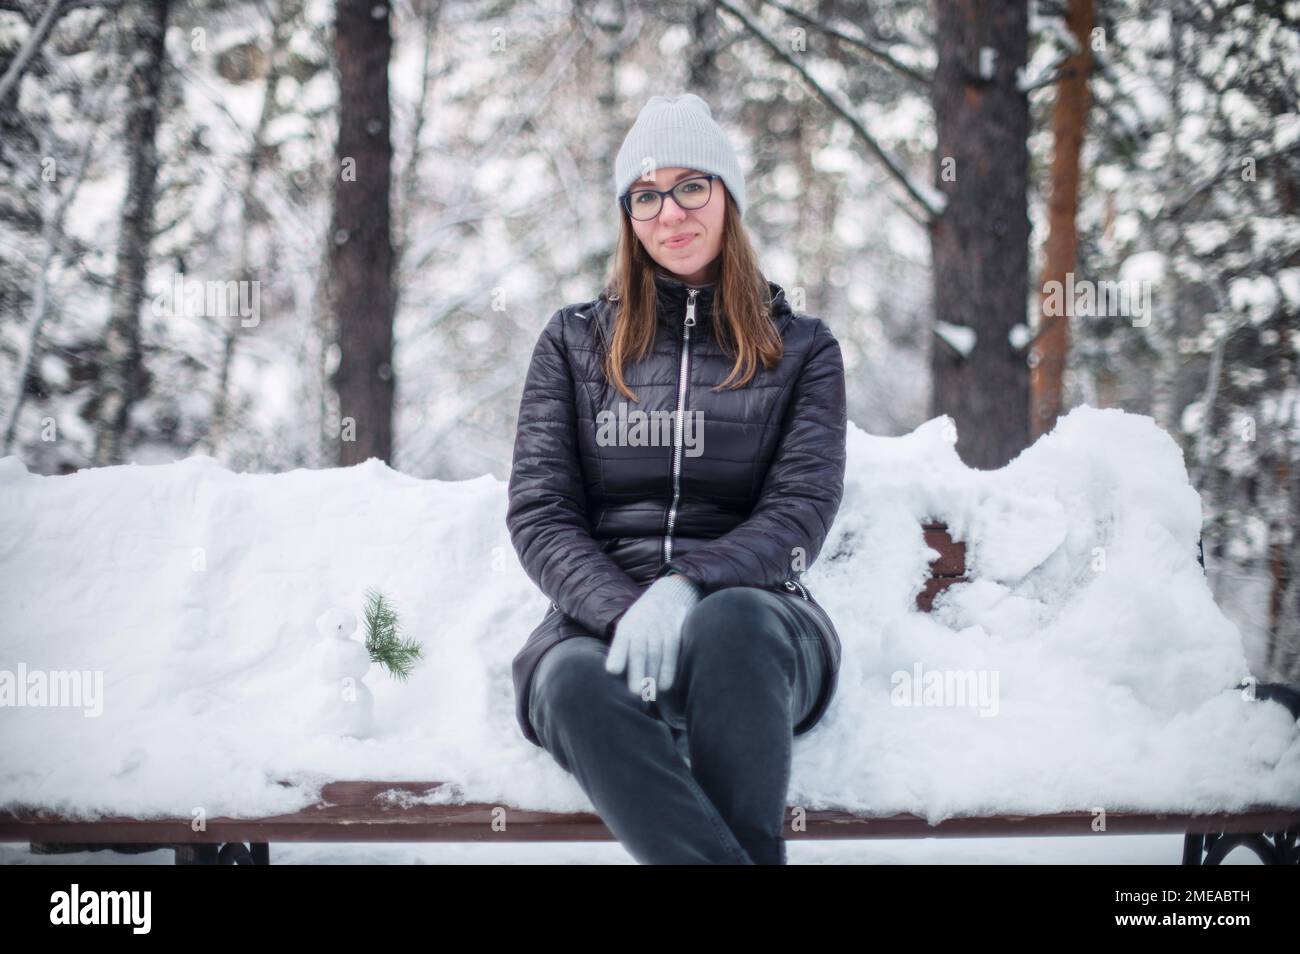 Woman in winter jacket walking in snowy winter forest, snowy winter day. Funny situation, woman fell down and laughs Stock Photo